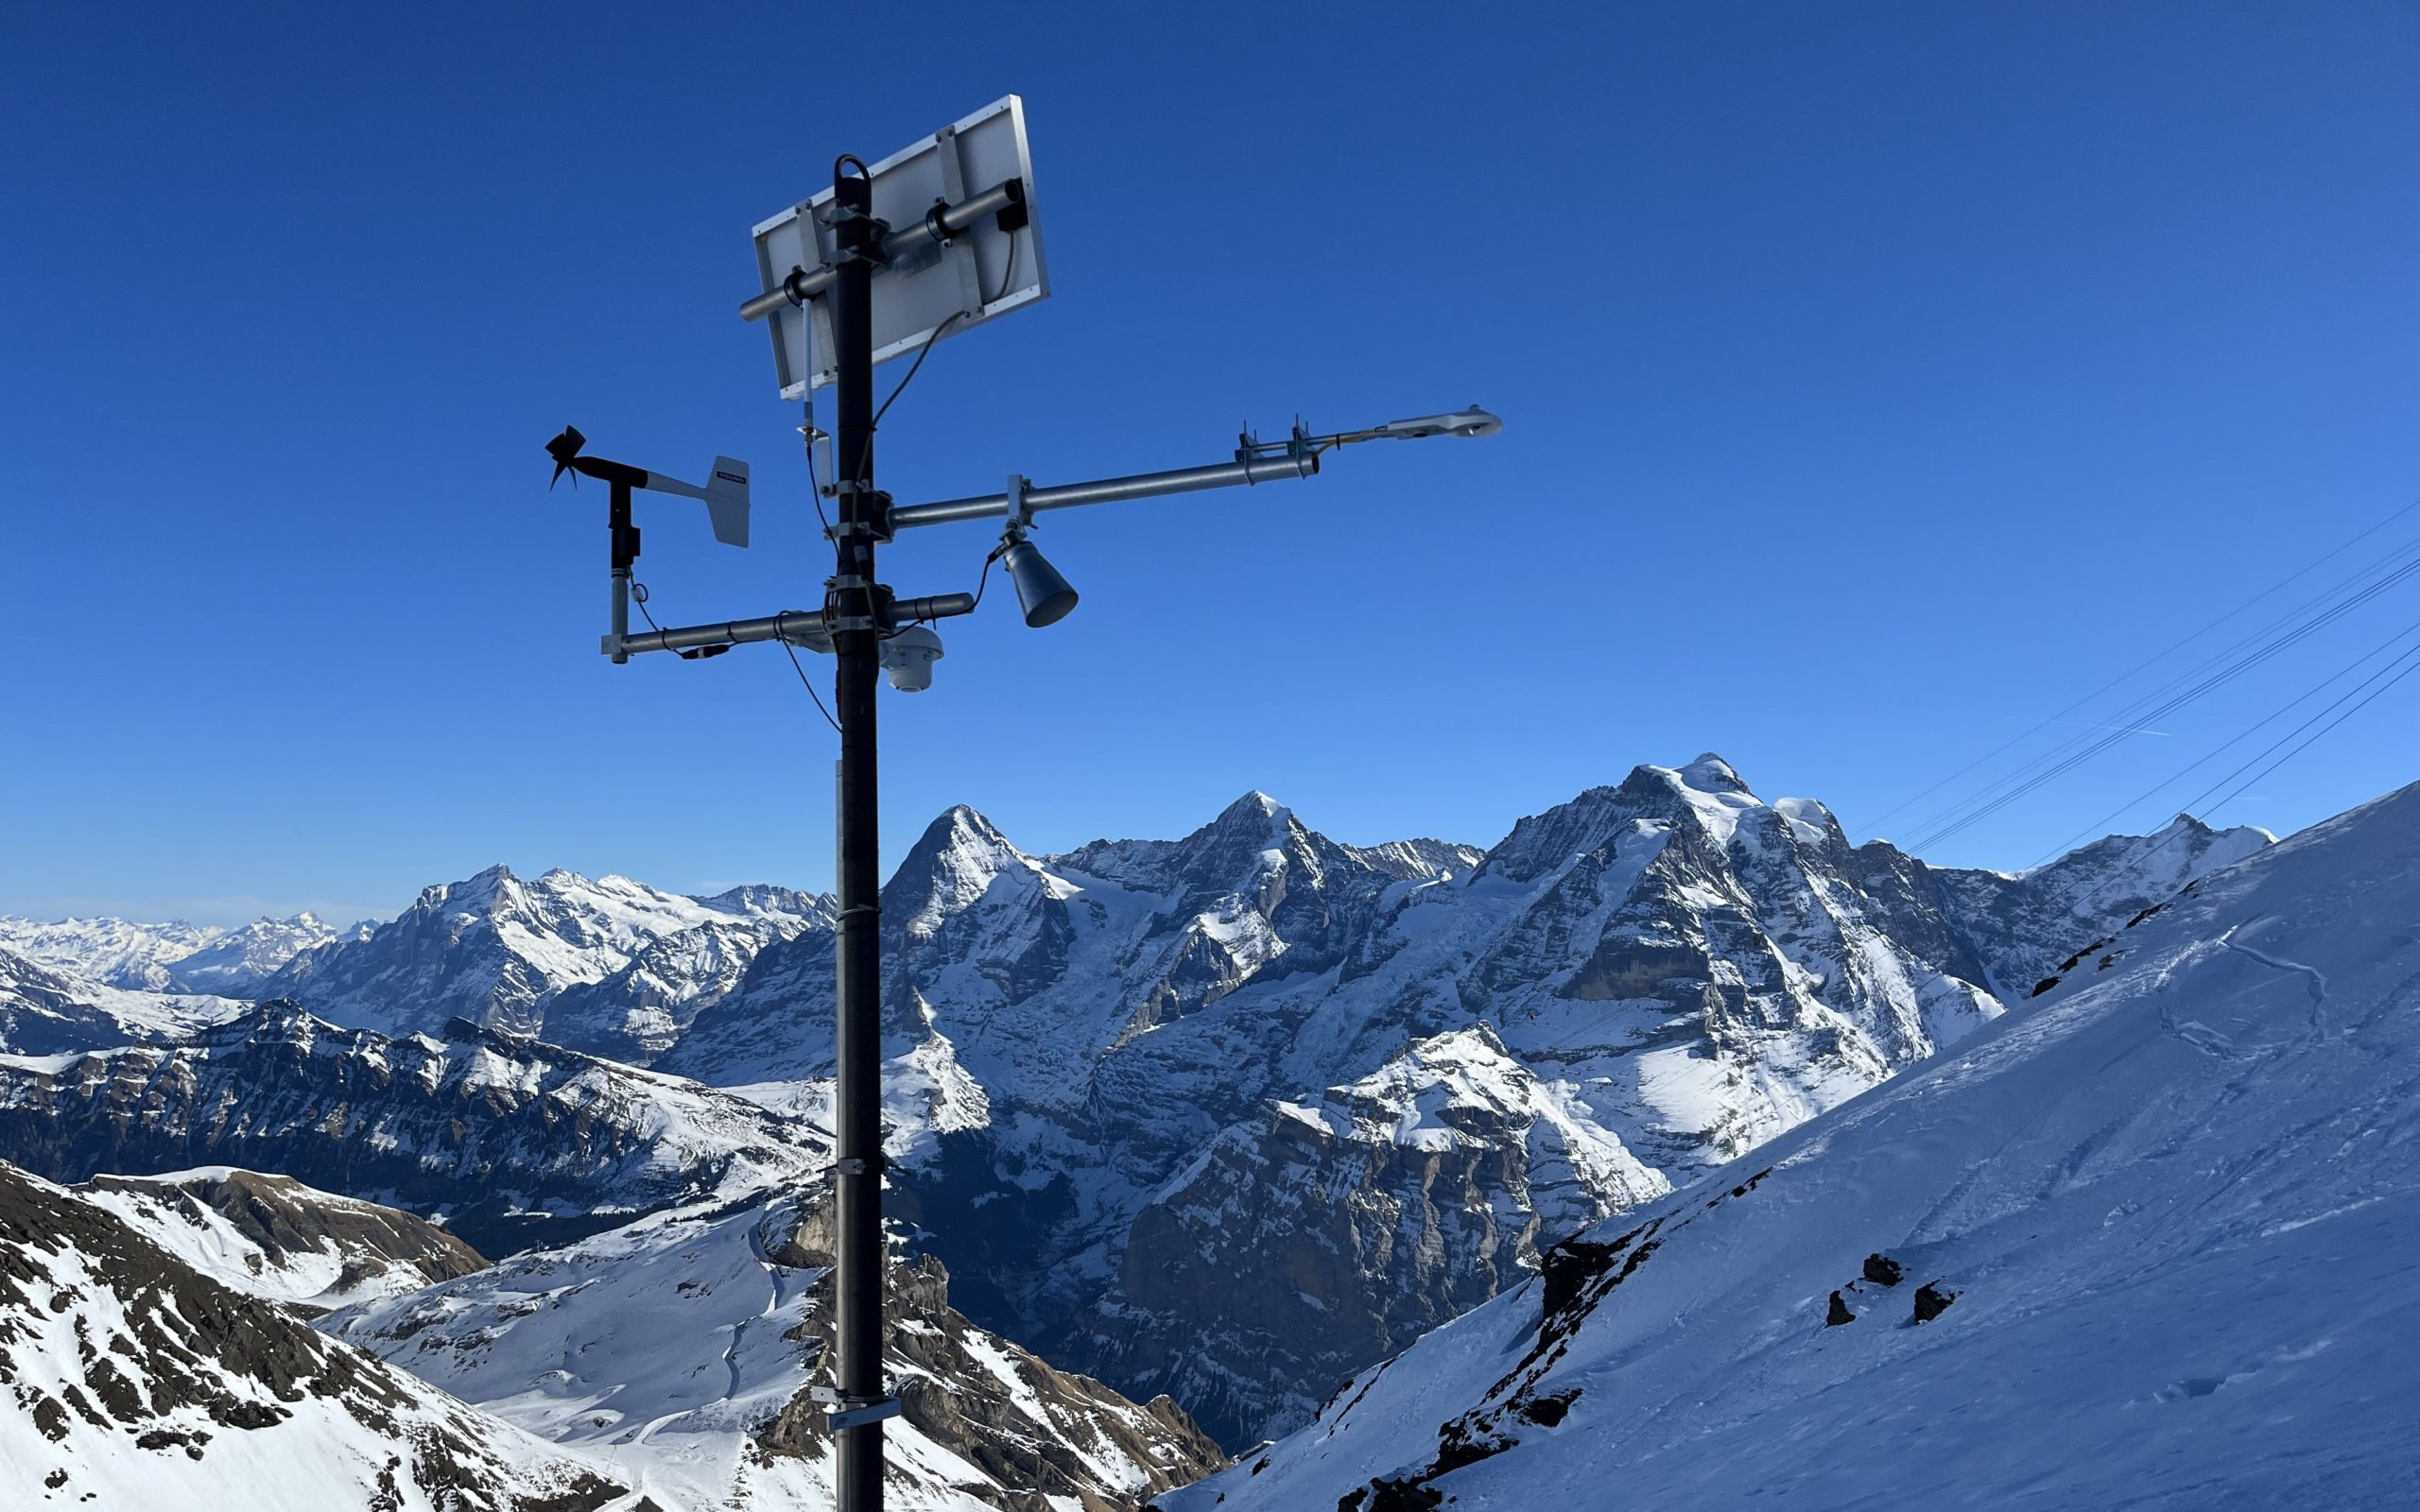 Sens Alpin's Permafrost Monitoring Stations powered by Astrocast in the Mount Blanc 